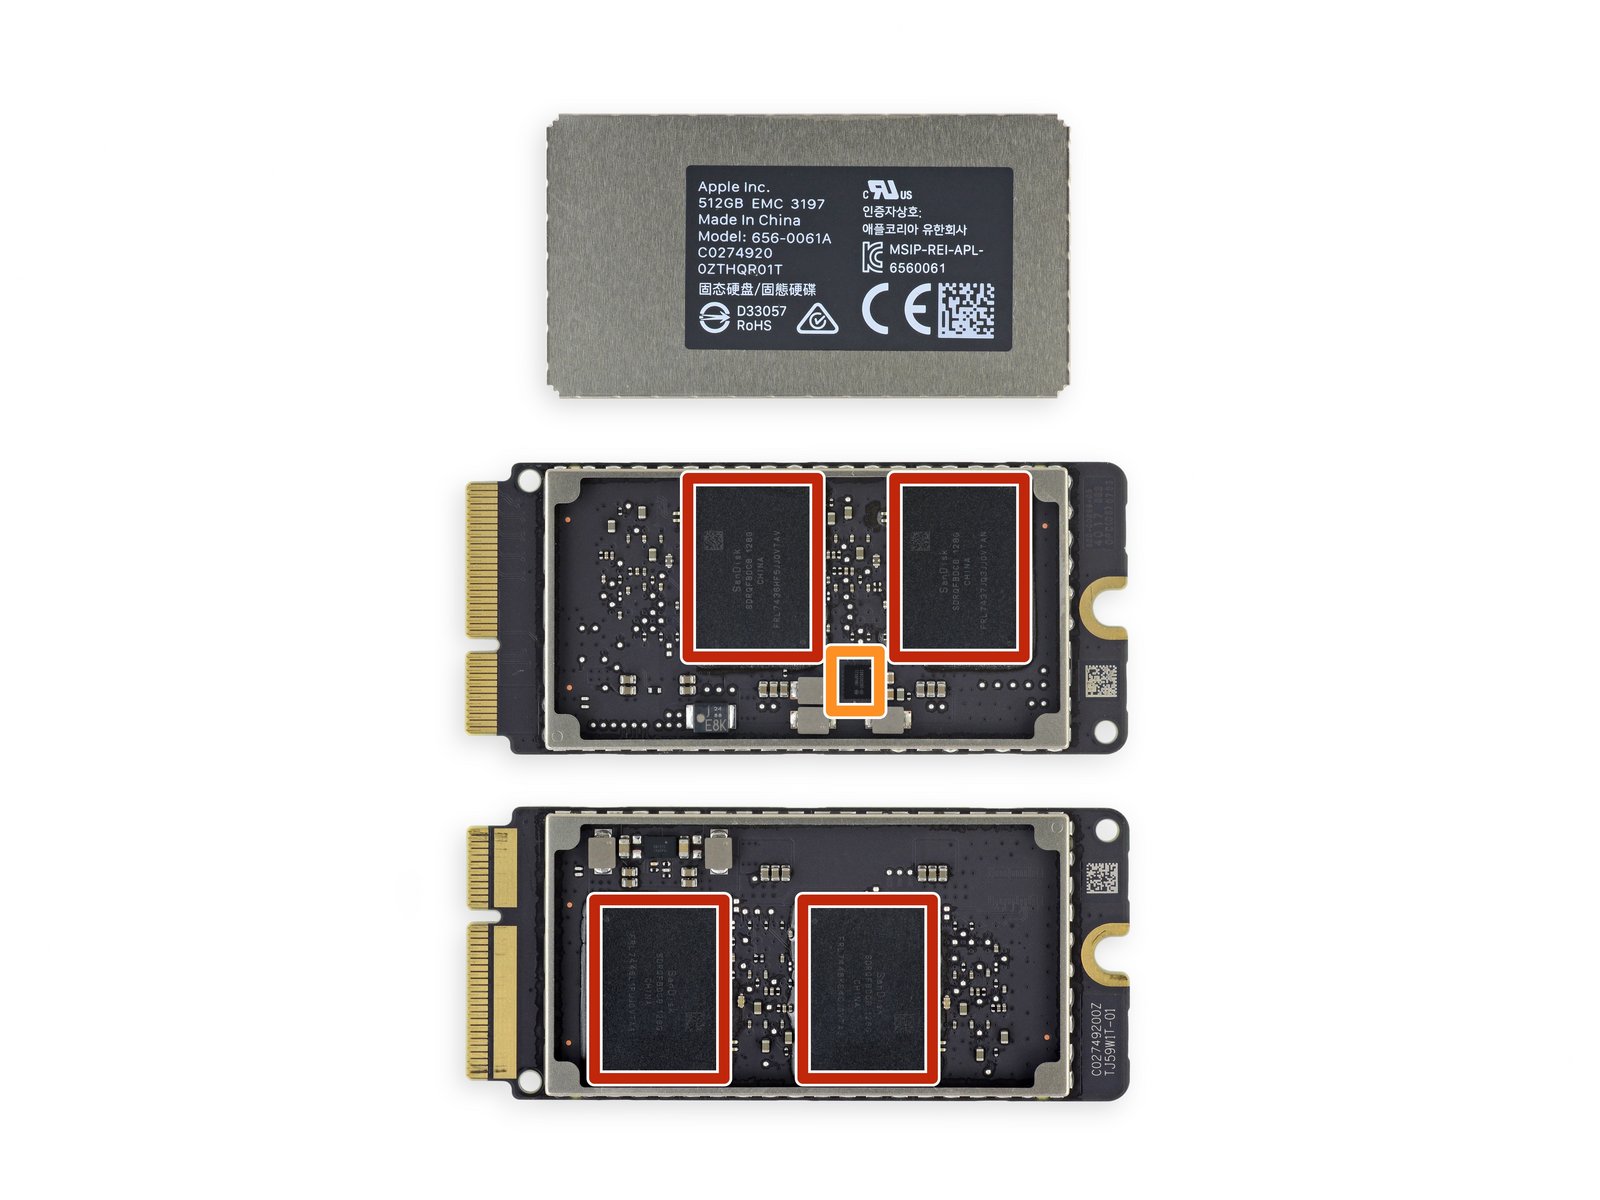 timeren Derive Hav Apple SSD for Mac Pro: kind and quality? | MacRumors Forums